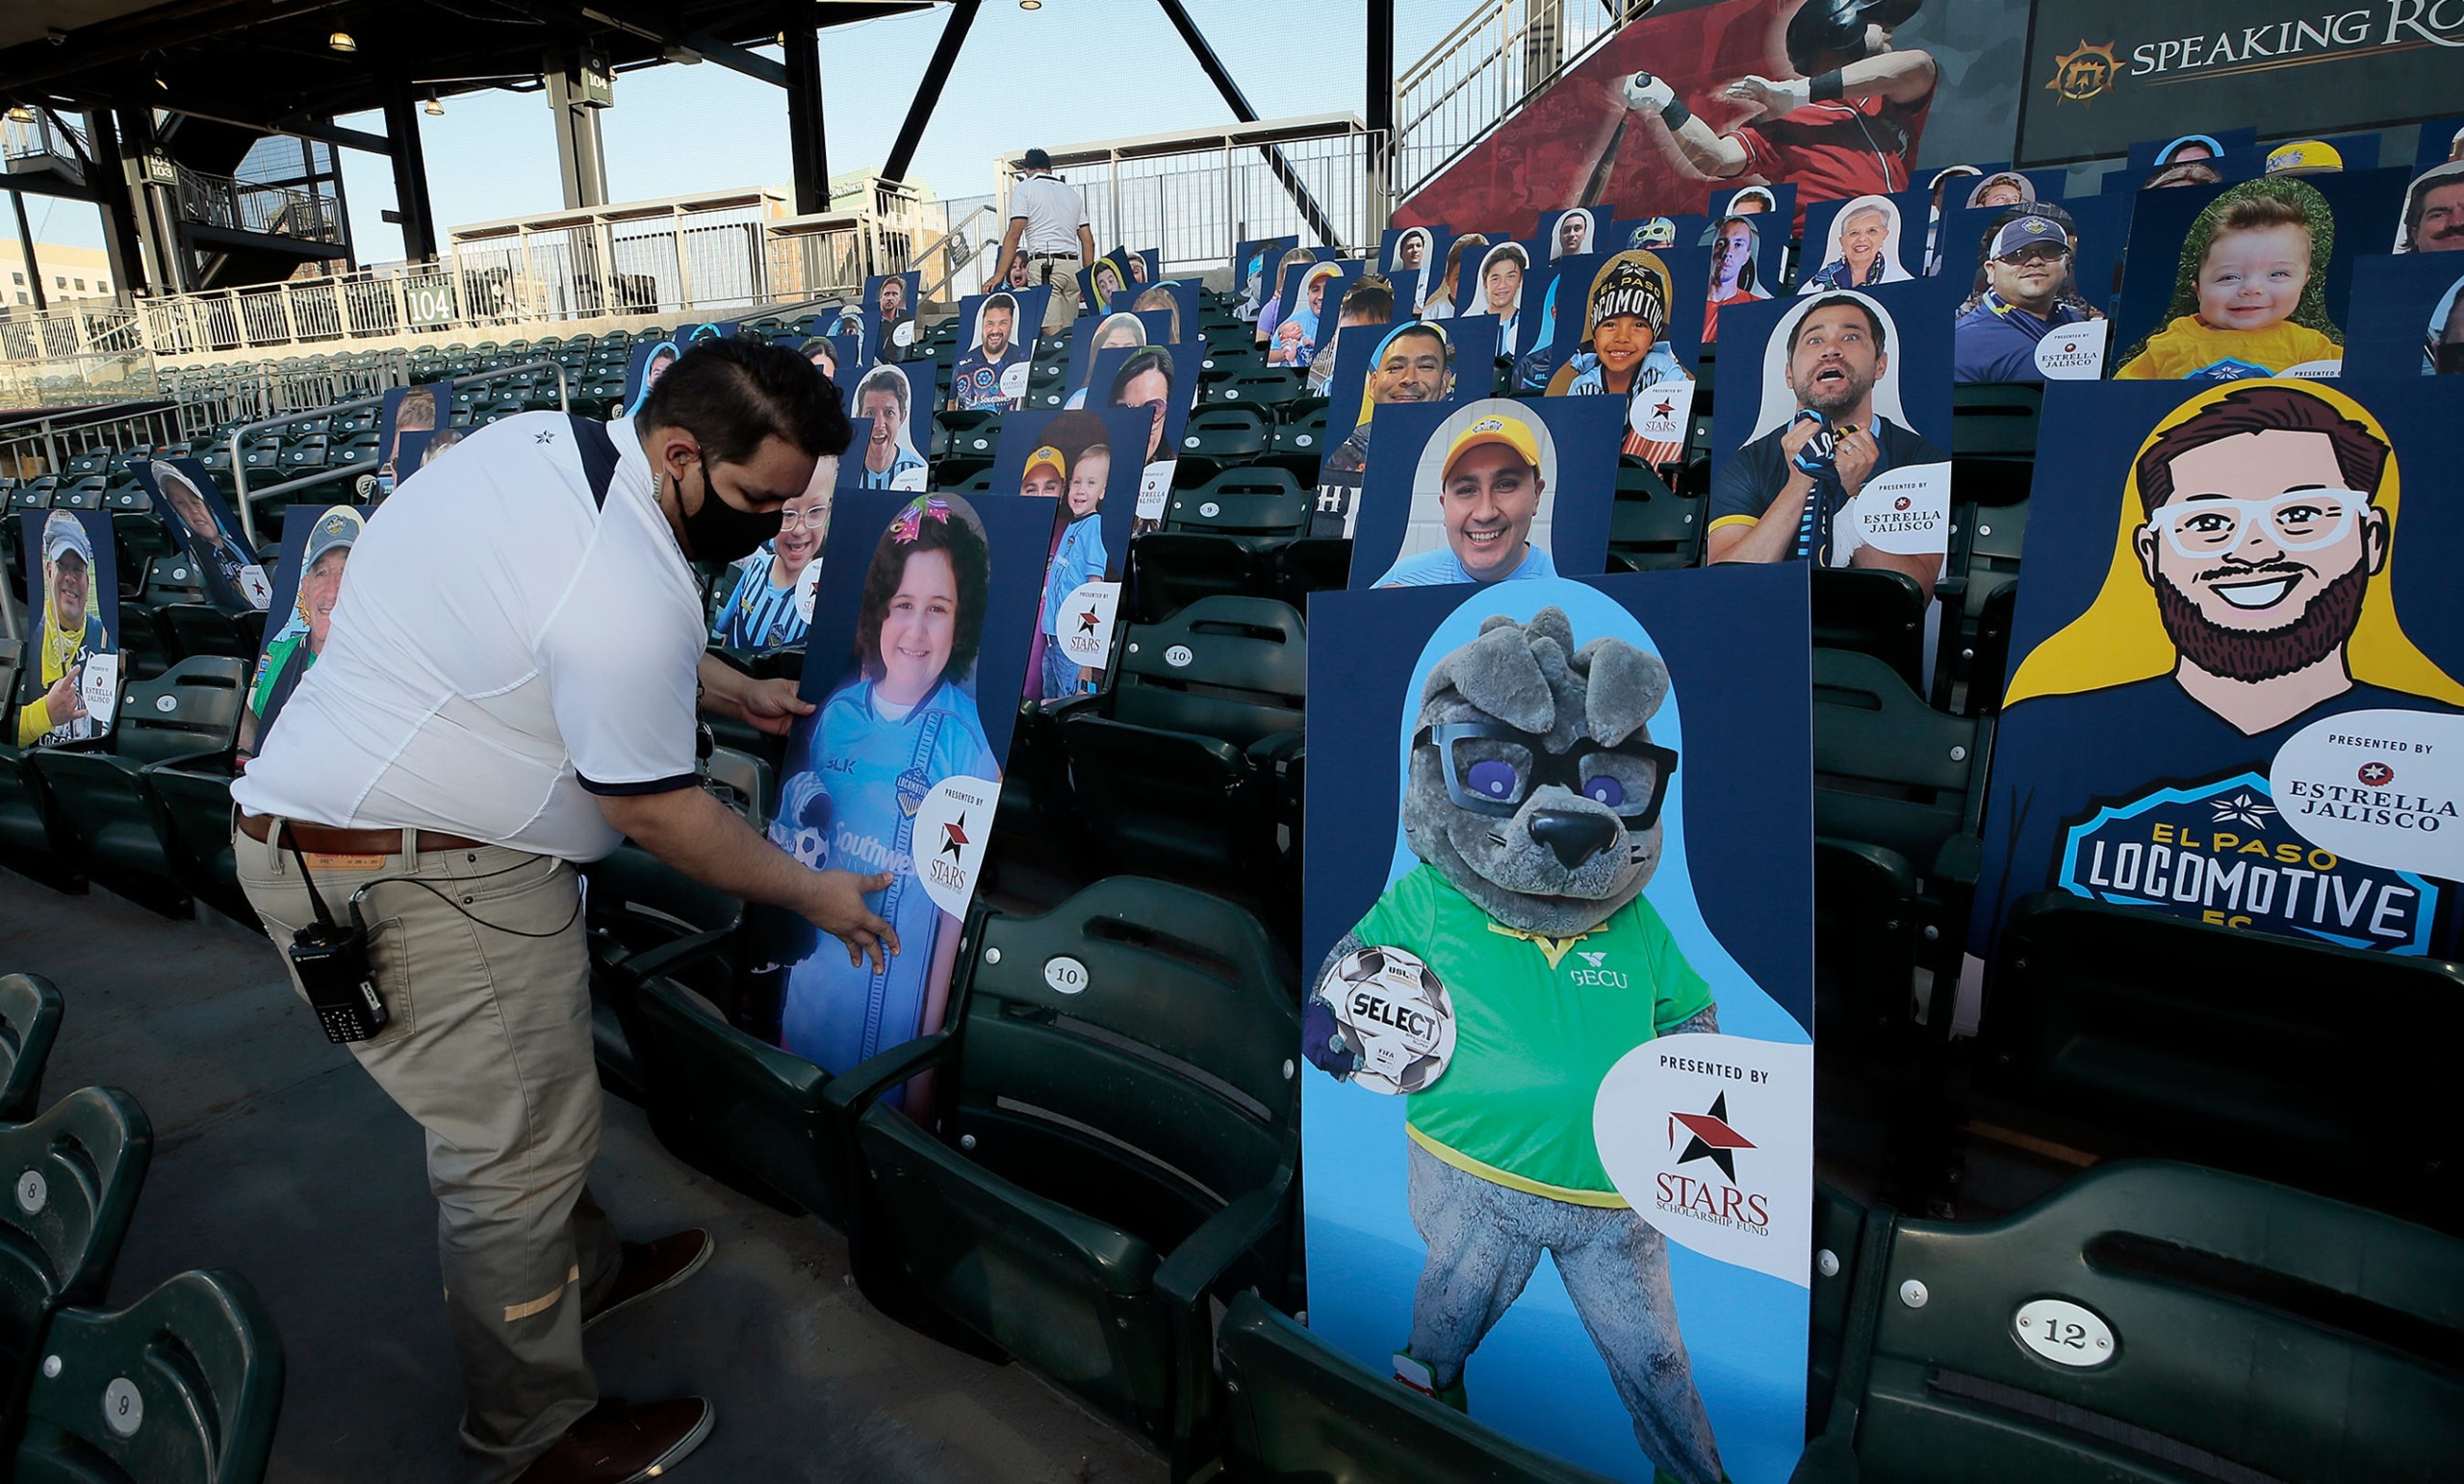 Oakland A's plan to fill stadium with fan cutouts; Here's how to